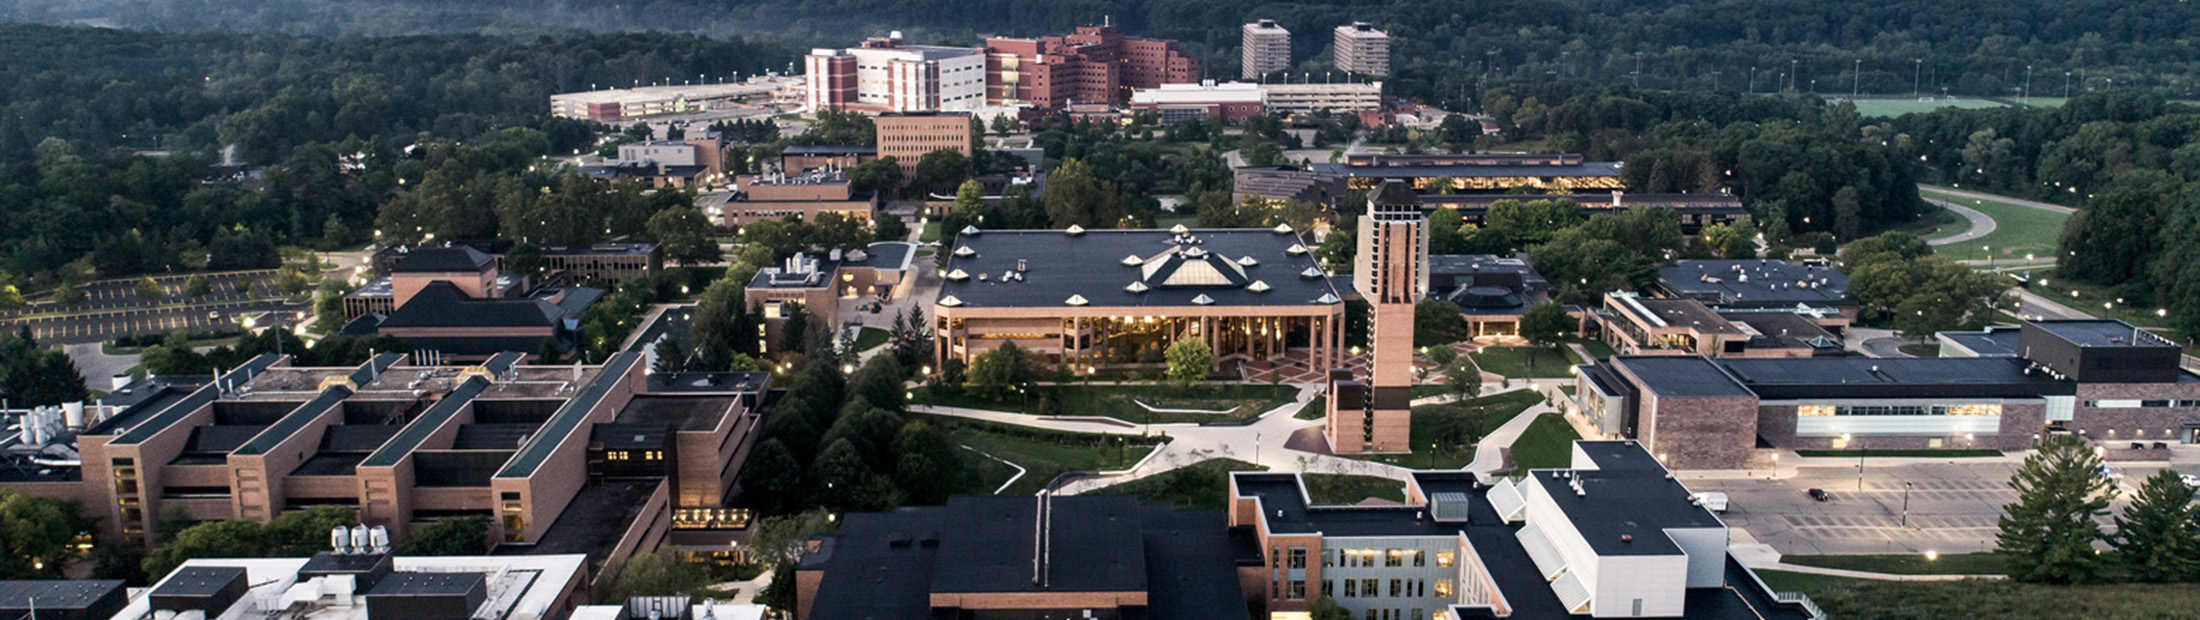 An aerial view of several buildings on North Campus.